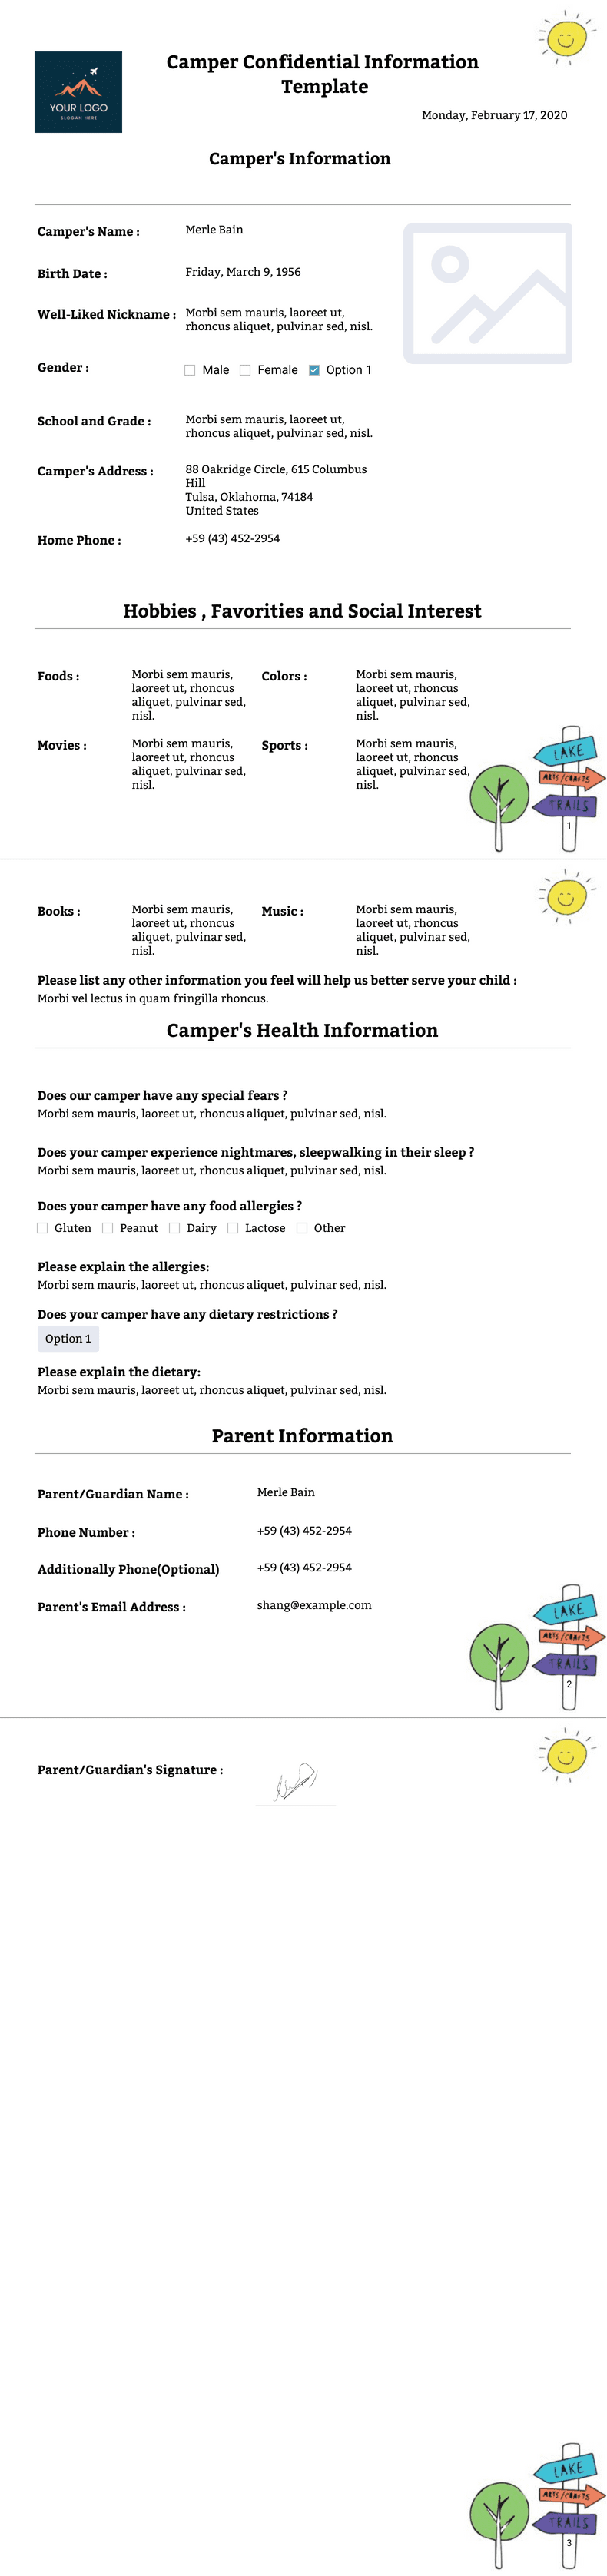 Camper Confidential Information Template